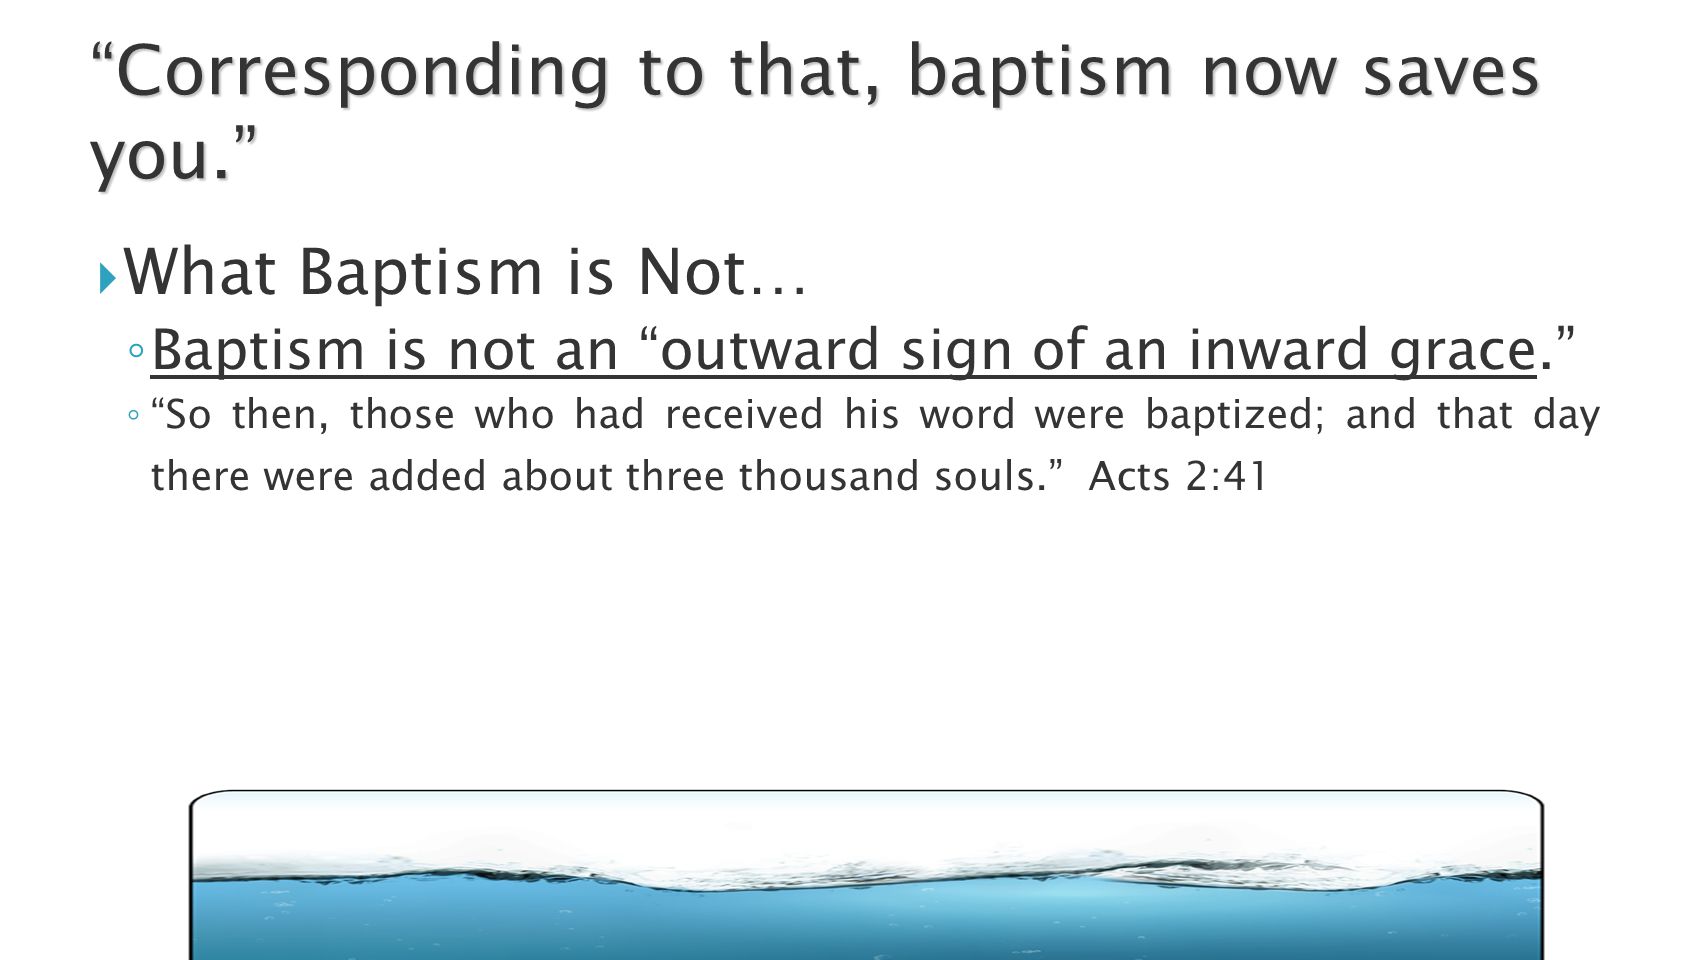  What Baptism is Not… ◦ Baptism is not an outward sign of an inward grace. ◦ So then, those who had received his word were baptized; and that day there were added about three thousand souls. Acts 2:41 Corresponding to that, baptism now saves you.